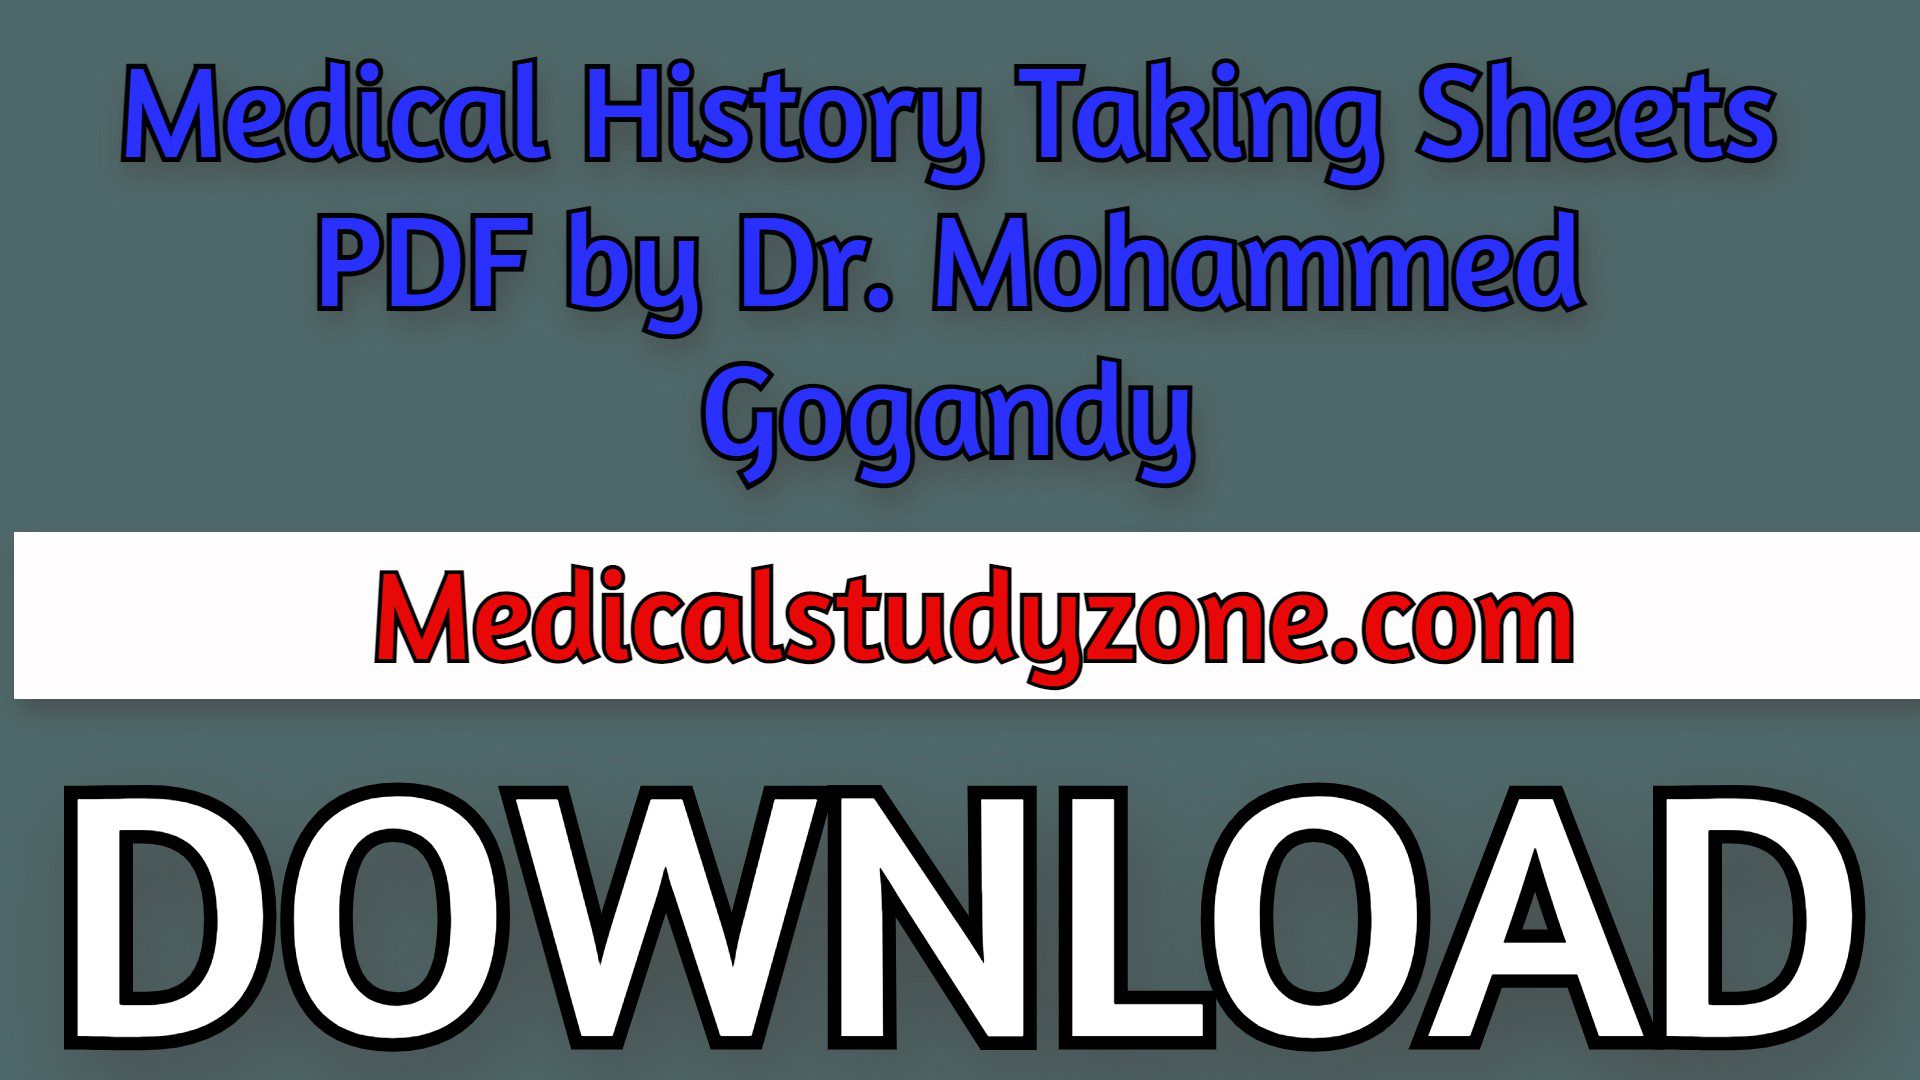 Medical History Taking Sheets PDF by Dr. Mohammed Gogandy Free Download